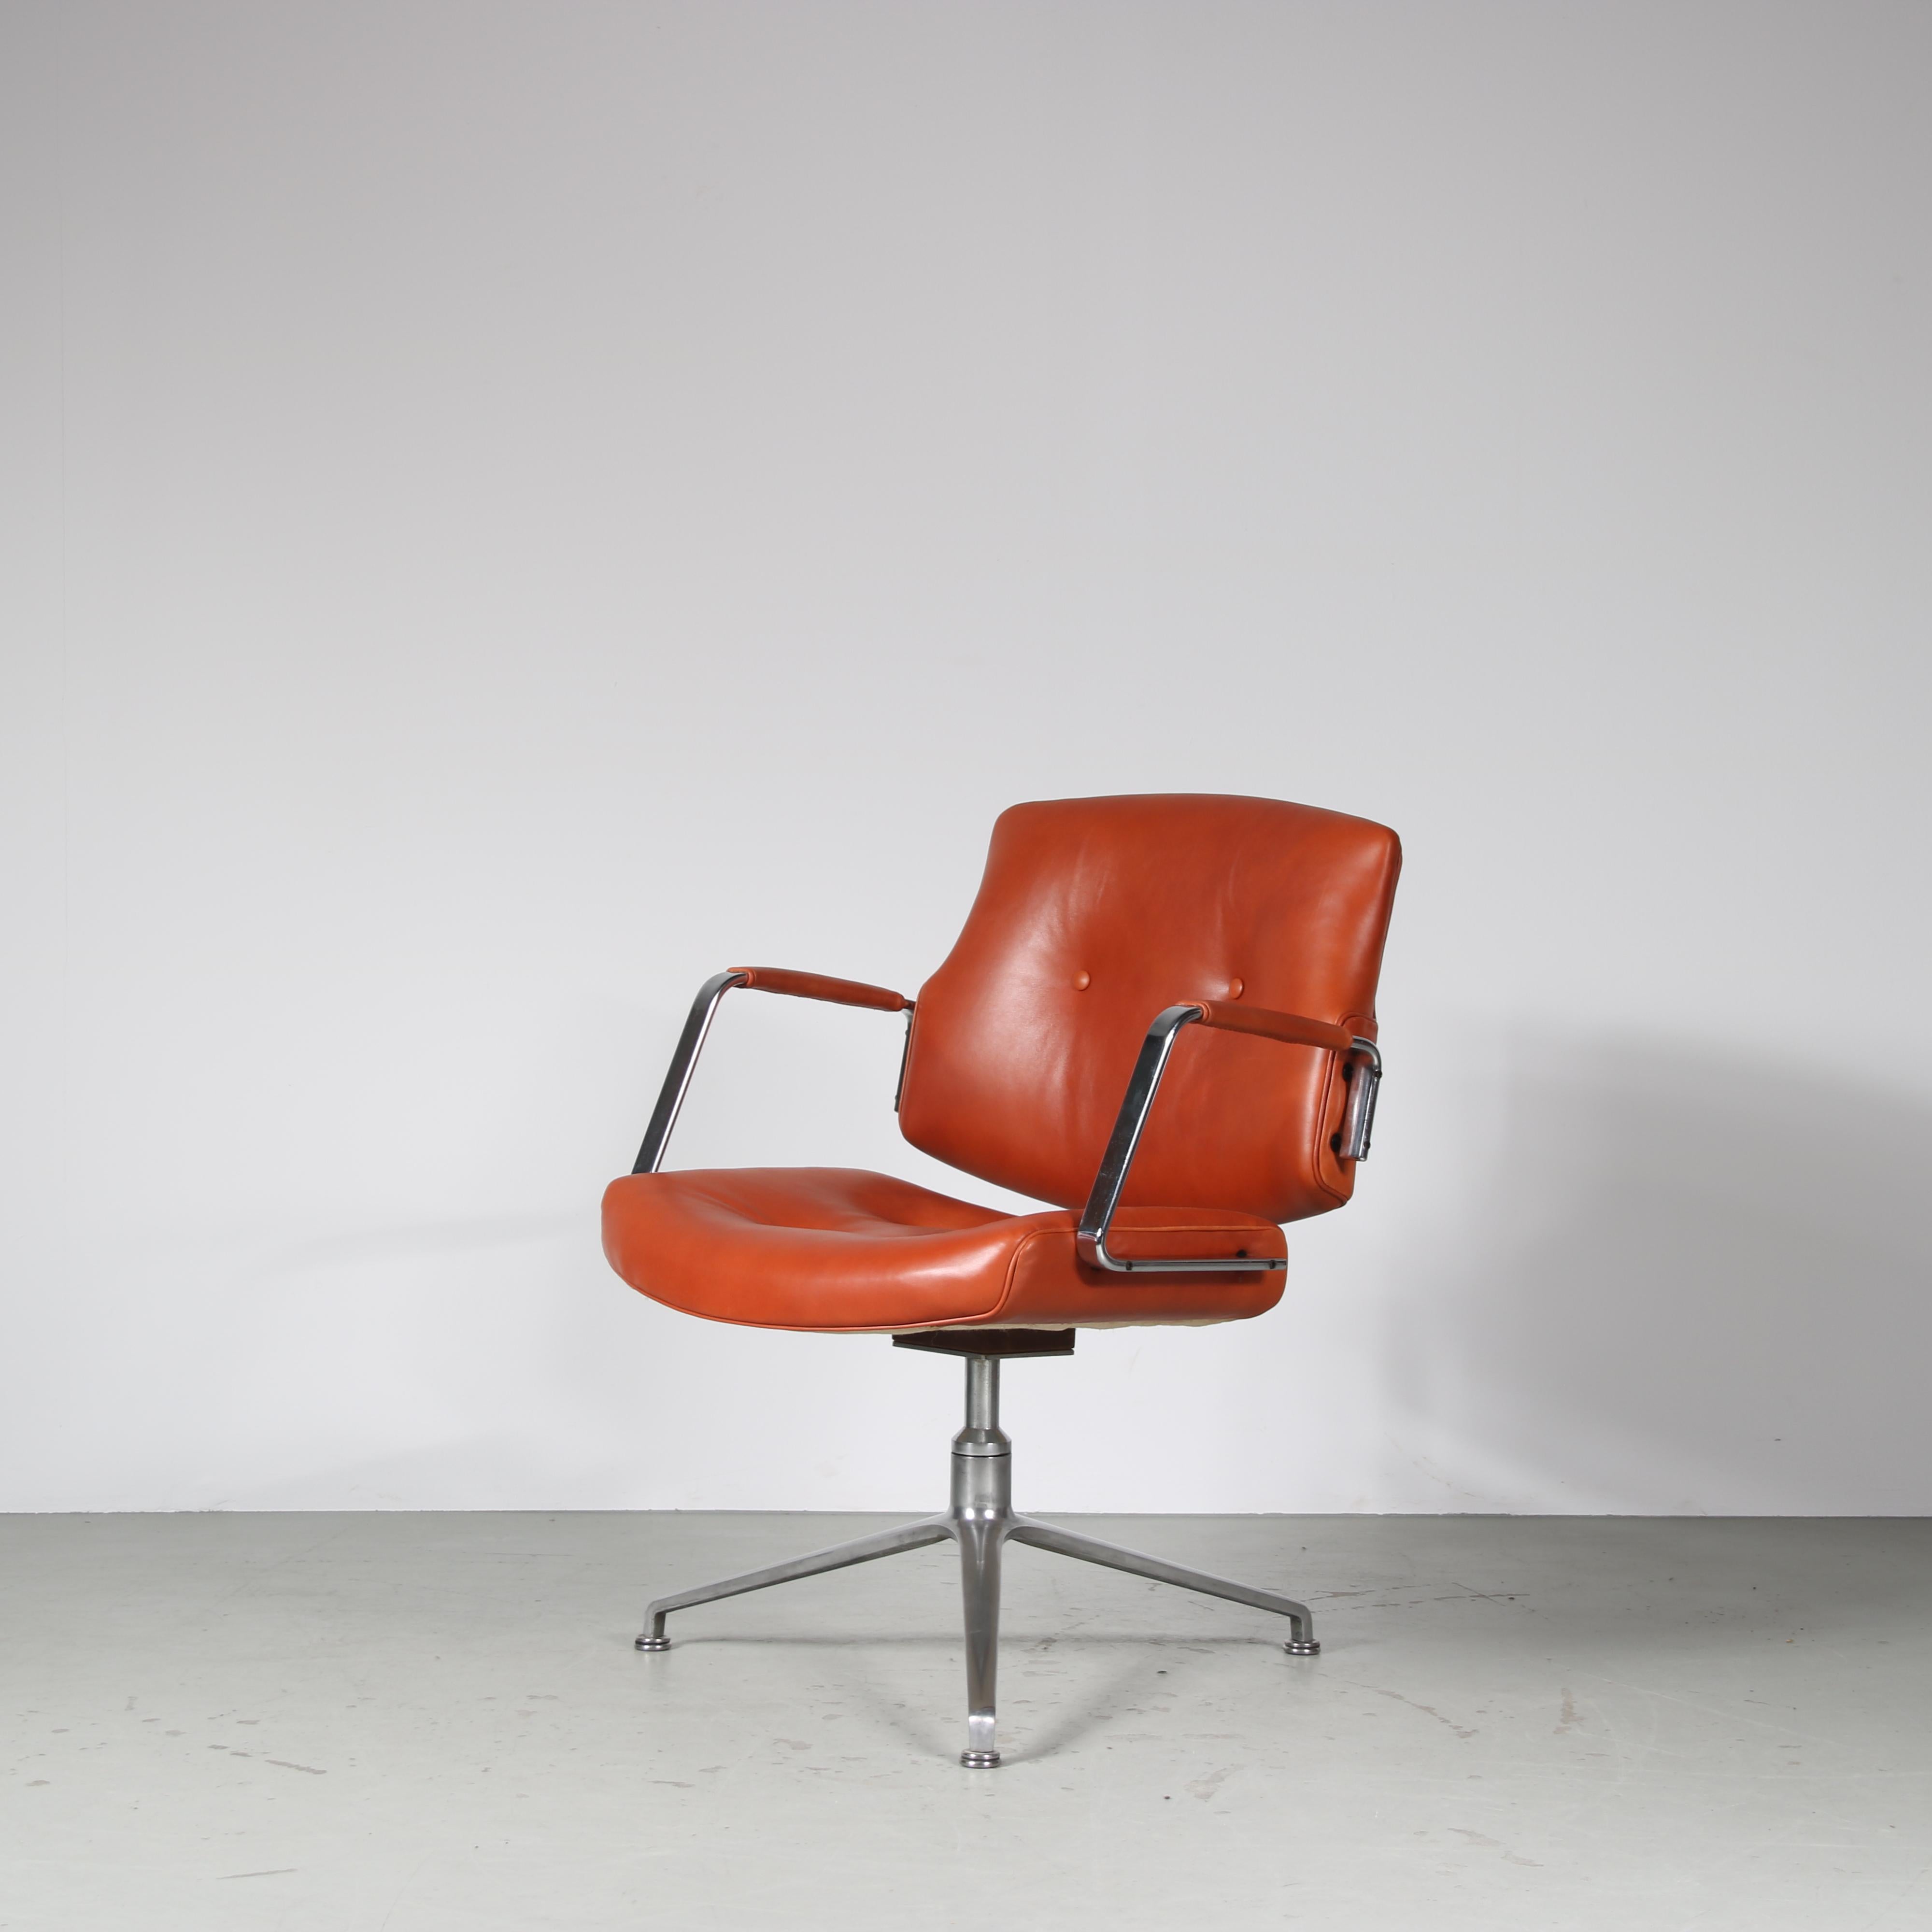 A fantastic office chair designed by Preben Fabricius and Jorgen Kastholm, manufactured by Kill International in Germany around 1970.

This eye-catching chair features an elegant, tubular chrome plated metal base that complements the rich cognac